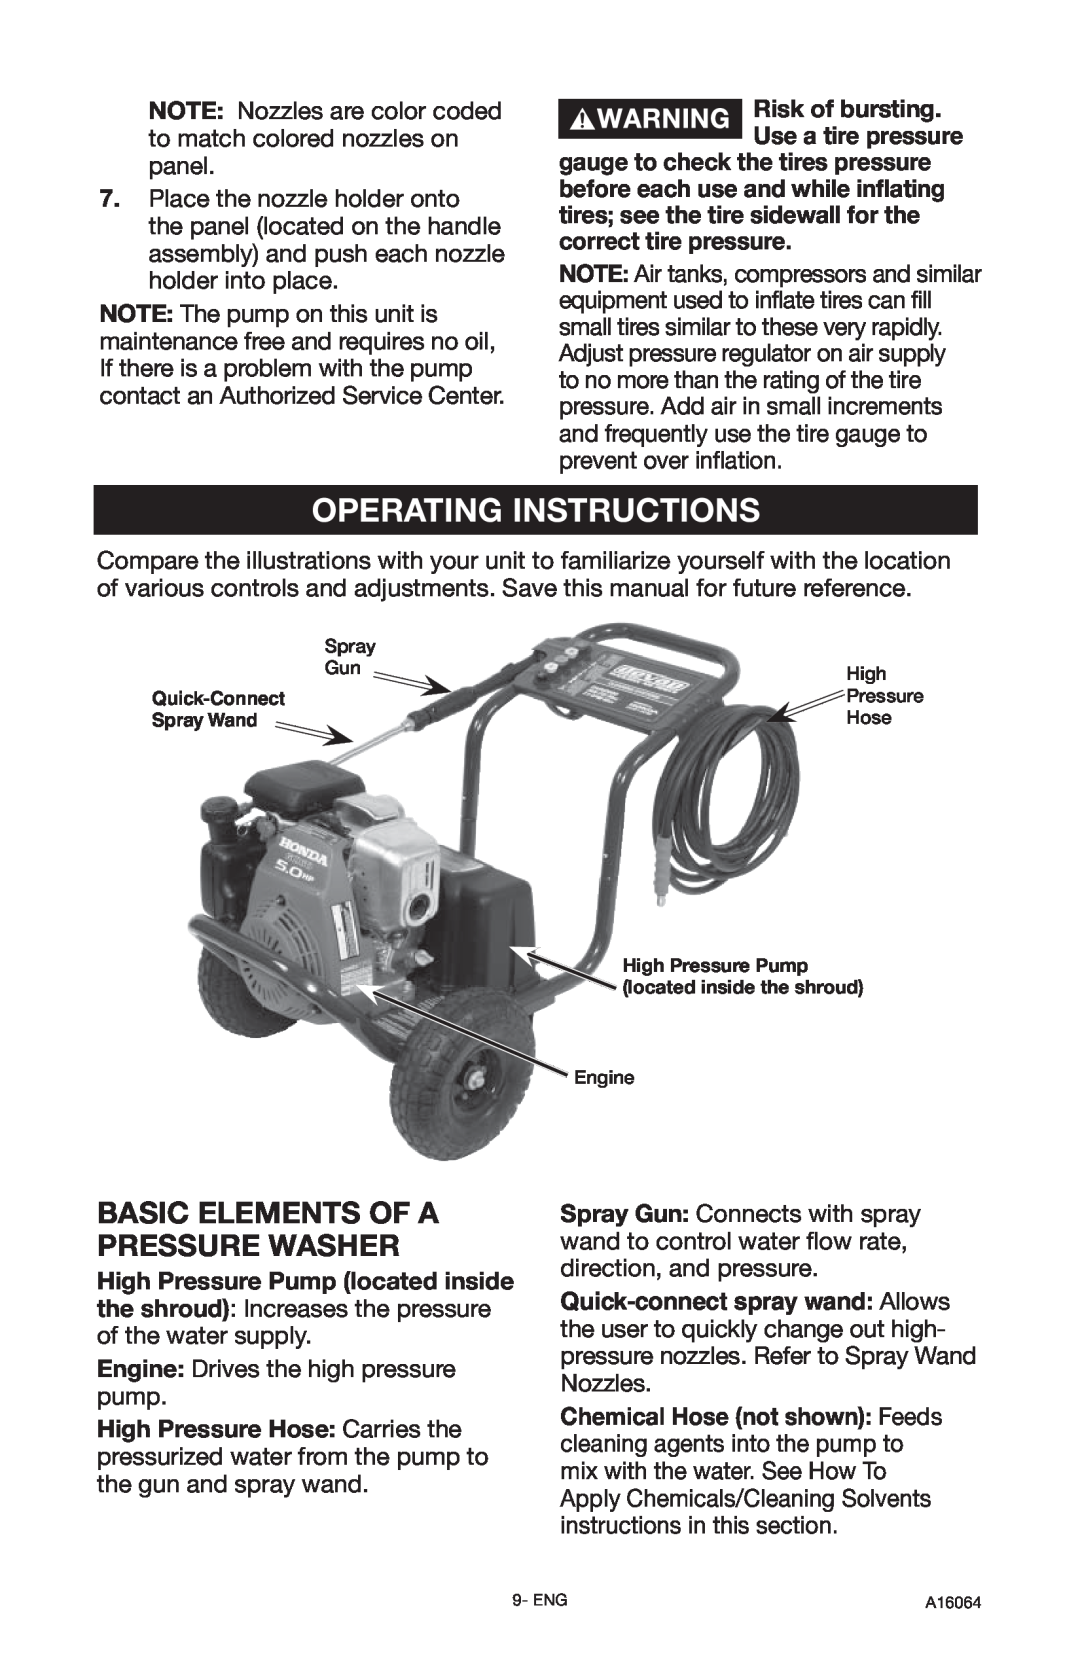 DeVillbiss Air Power Company DVH2600, A16064 operation manual Operating Instructions, Basic Elements Of A Pressure Washer 